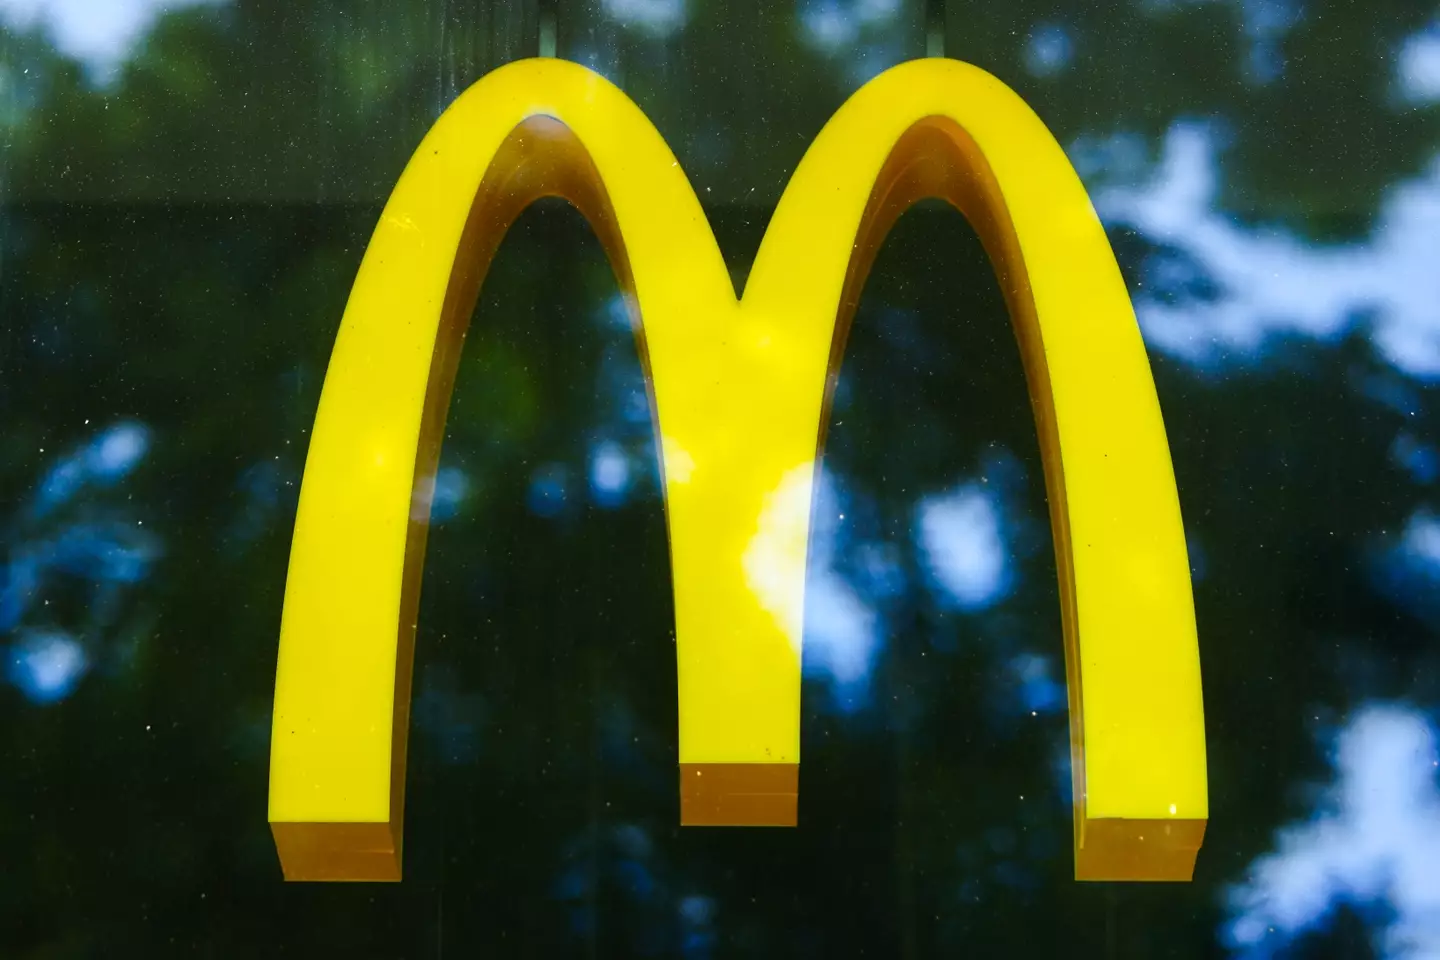 McDonald's has launched a new offer in its app.